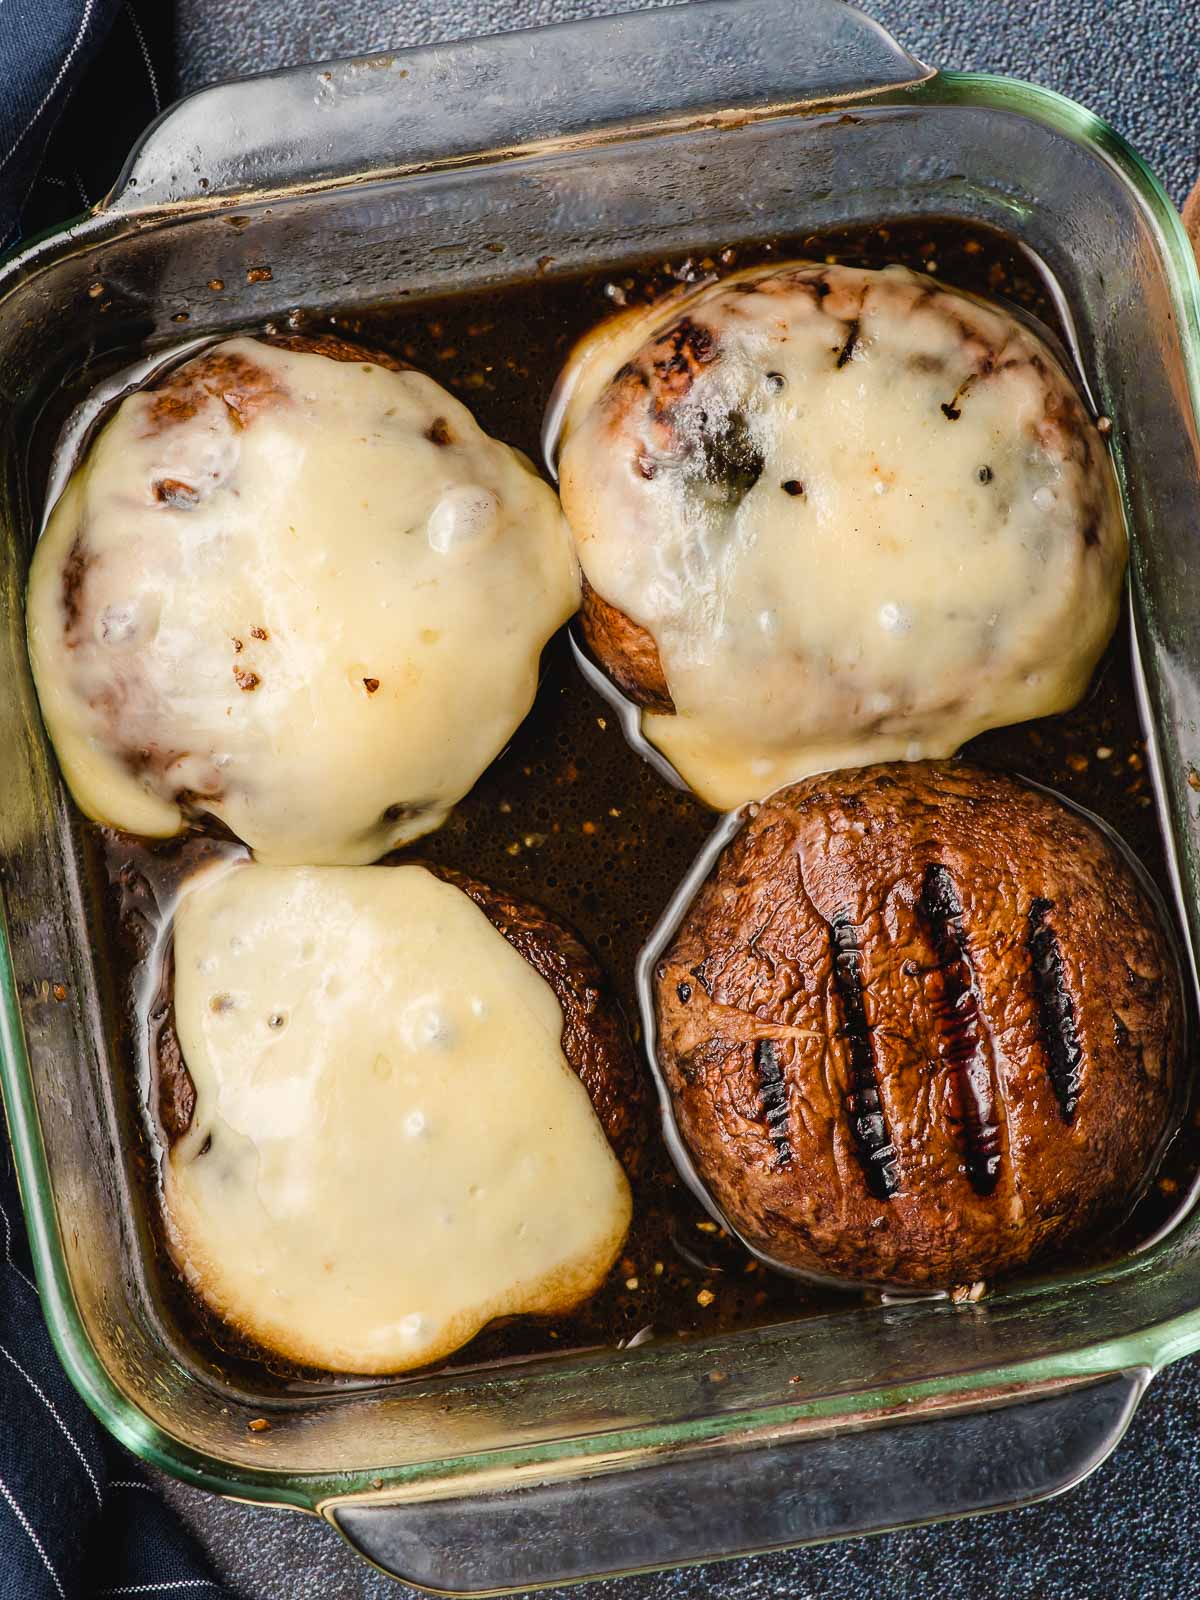 Four grilled portobello mushrooms with melted cheese on top.